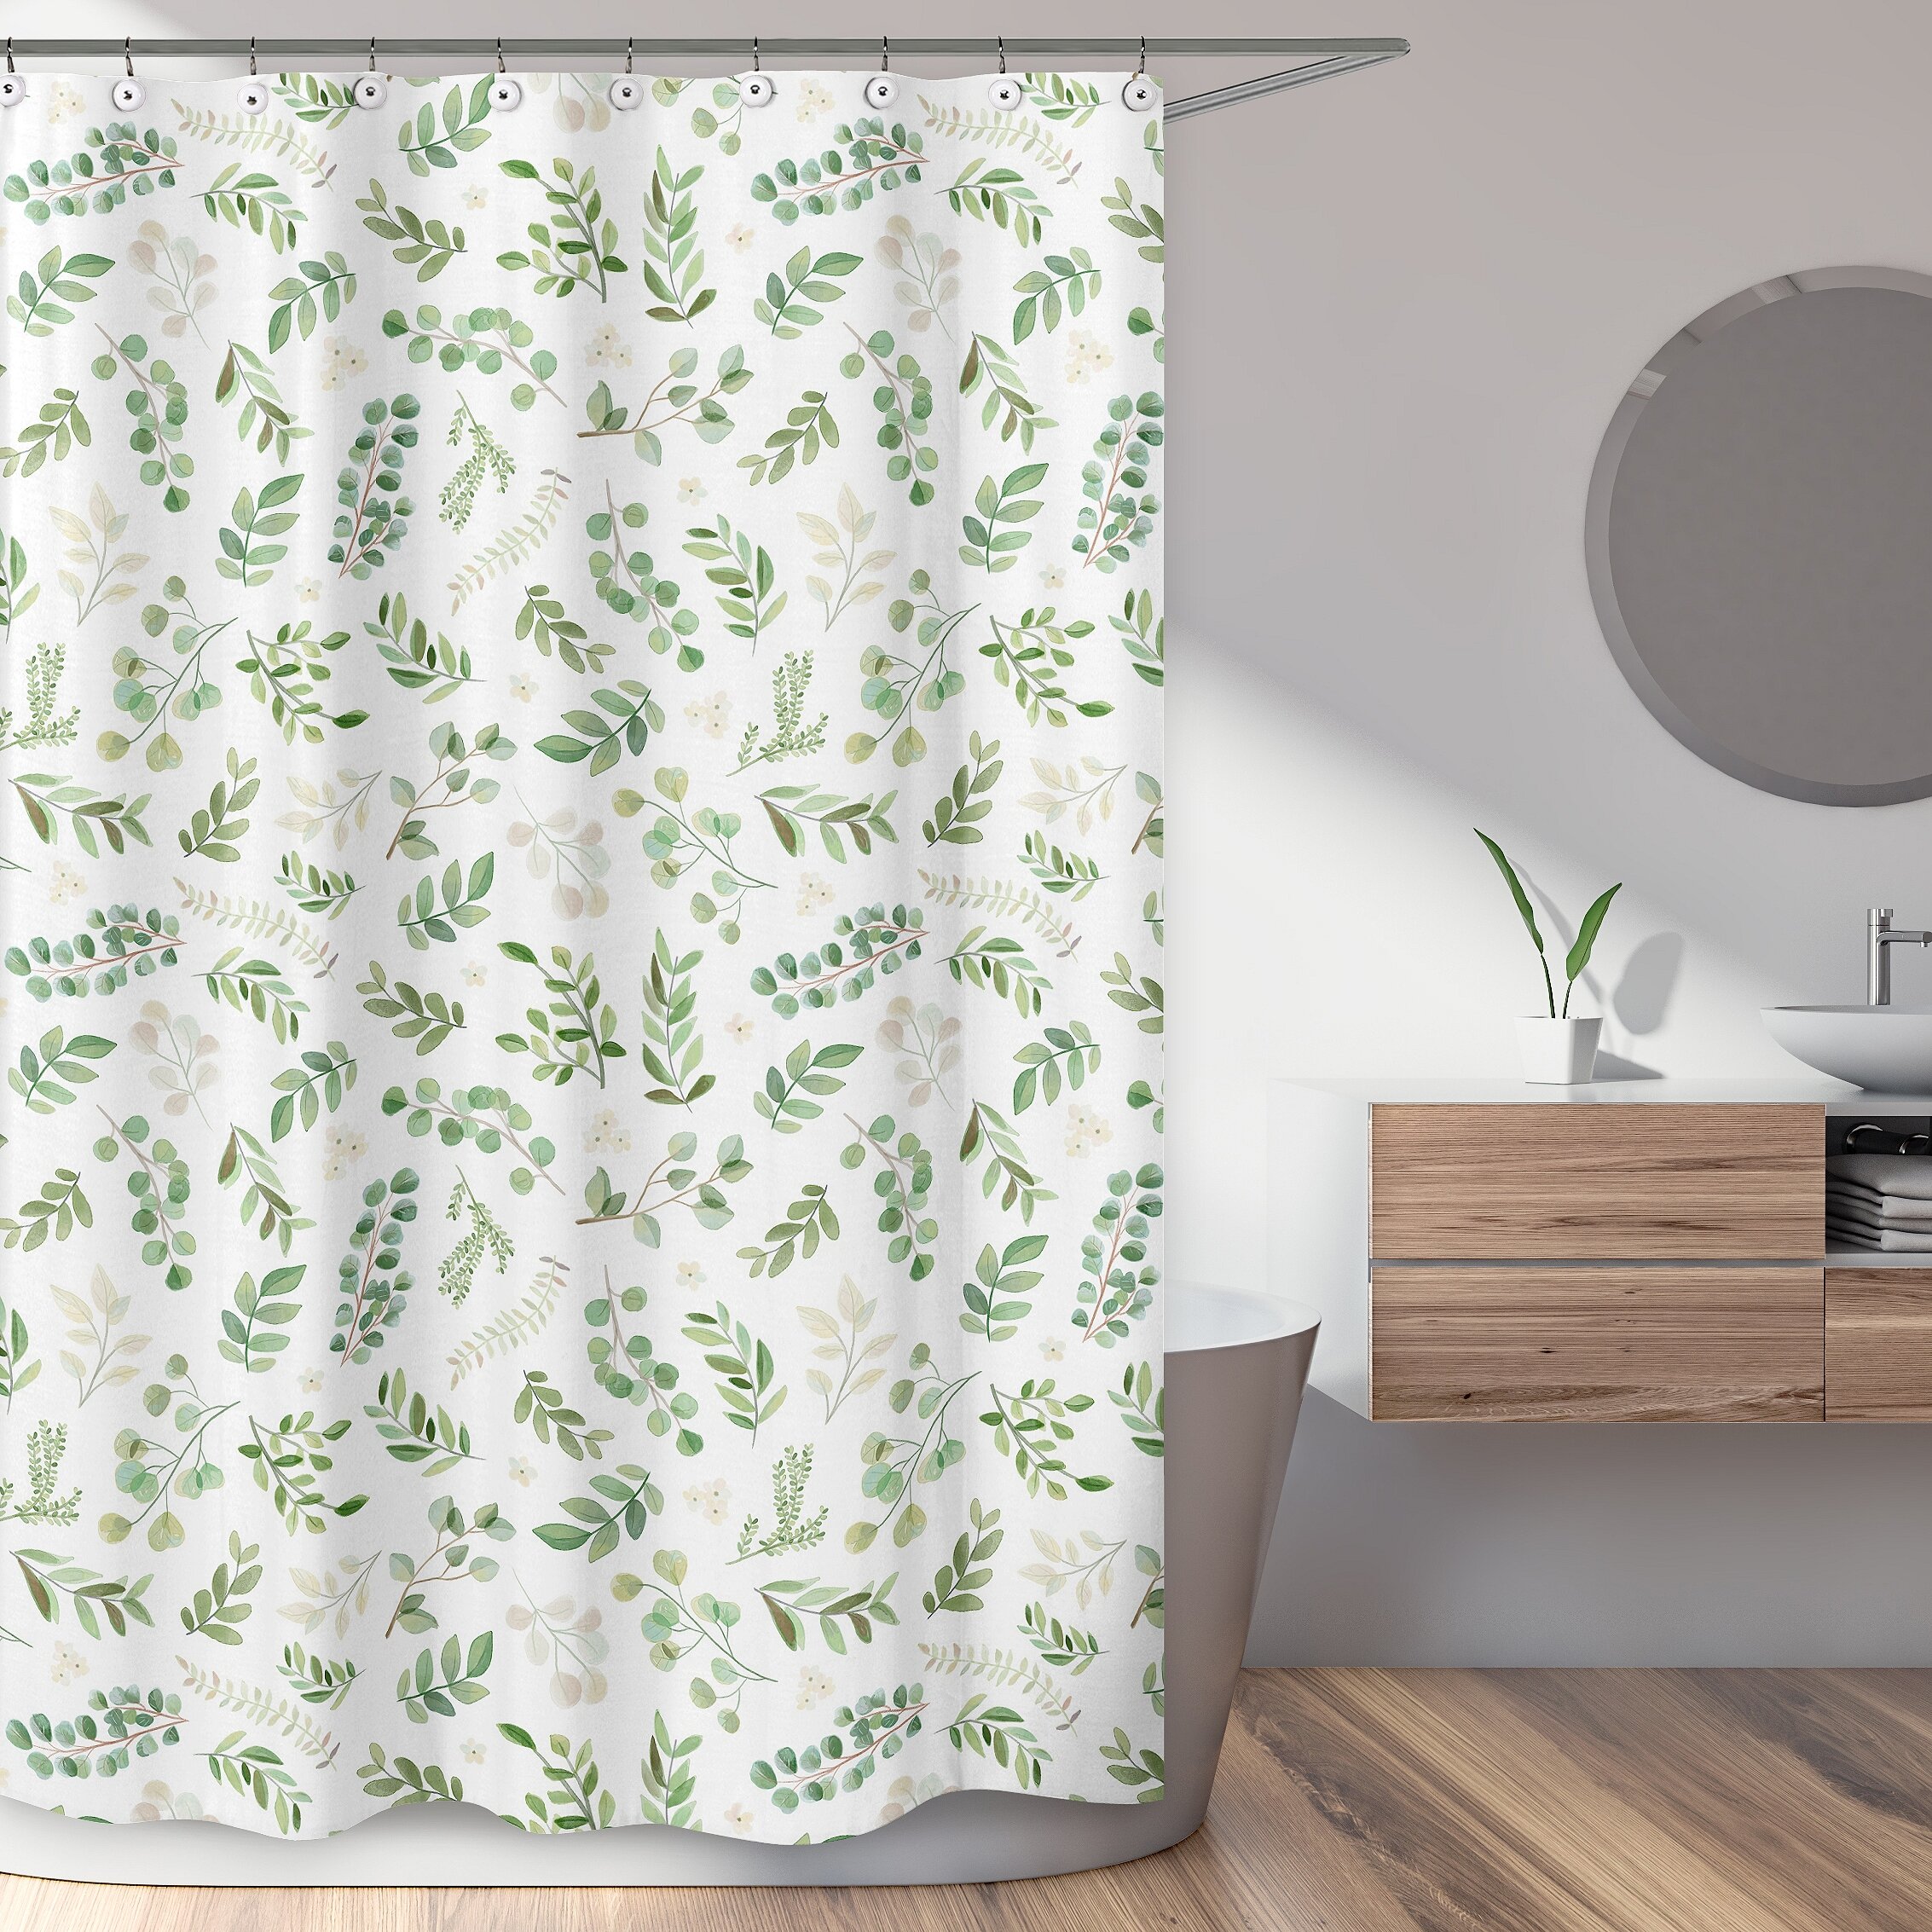 Seal Brown Chocolate sc_22957_extralong 84 Inches Extra Long Ambesonne Victorian Decor Shower Curtain Floral Paisley Ivy Design Leaves with Abstract Details Print Fabric Bathroom Decor Set with Hooks 